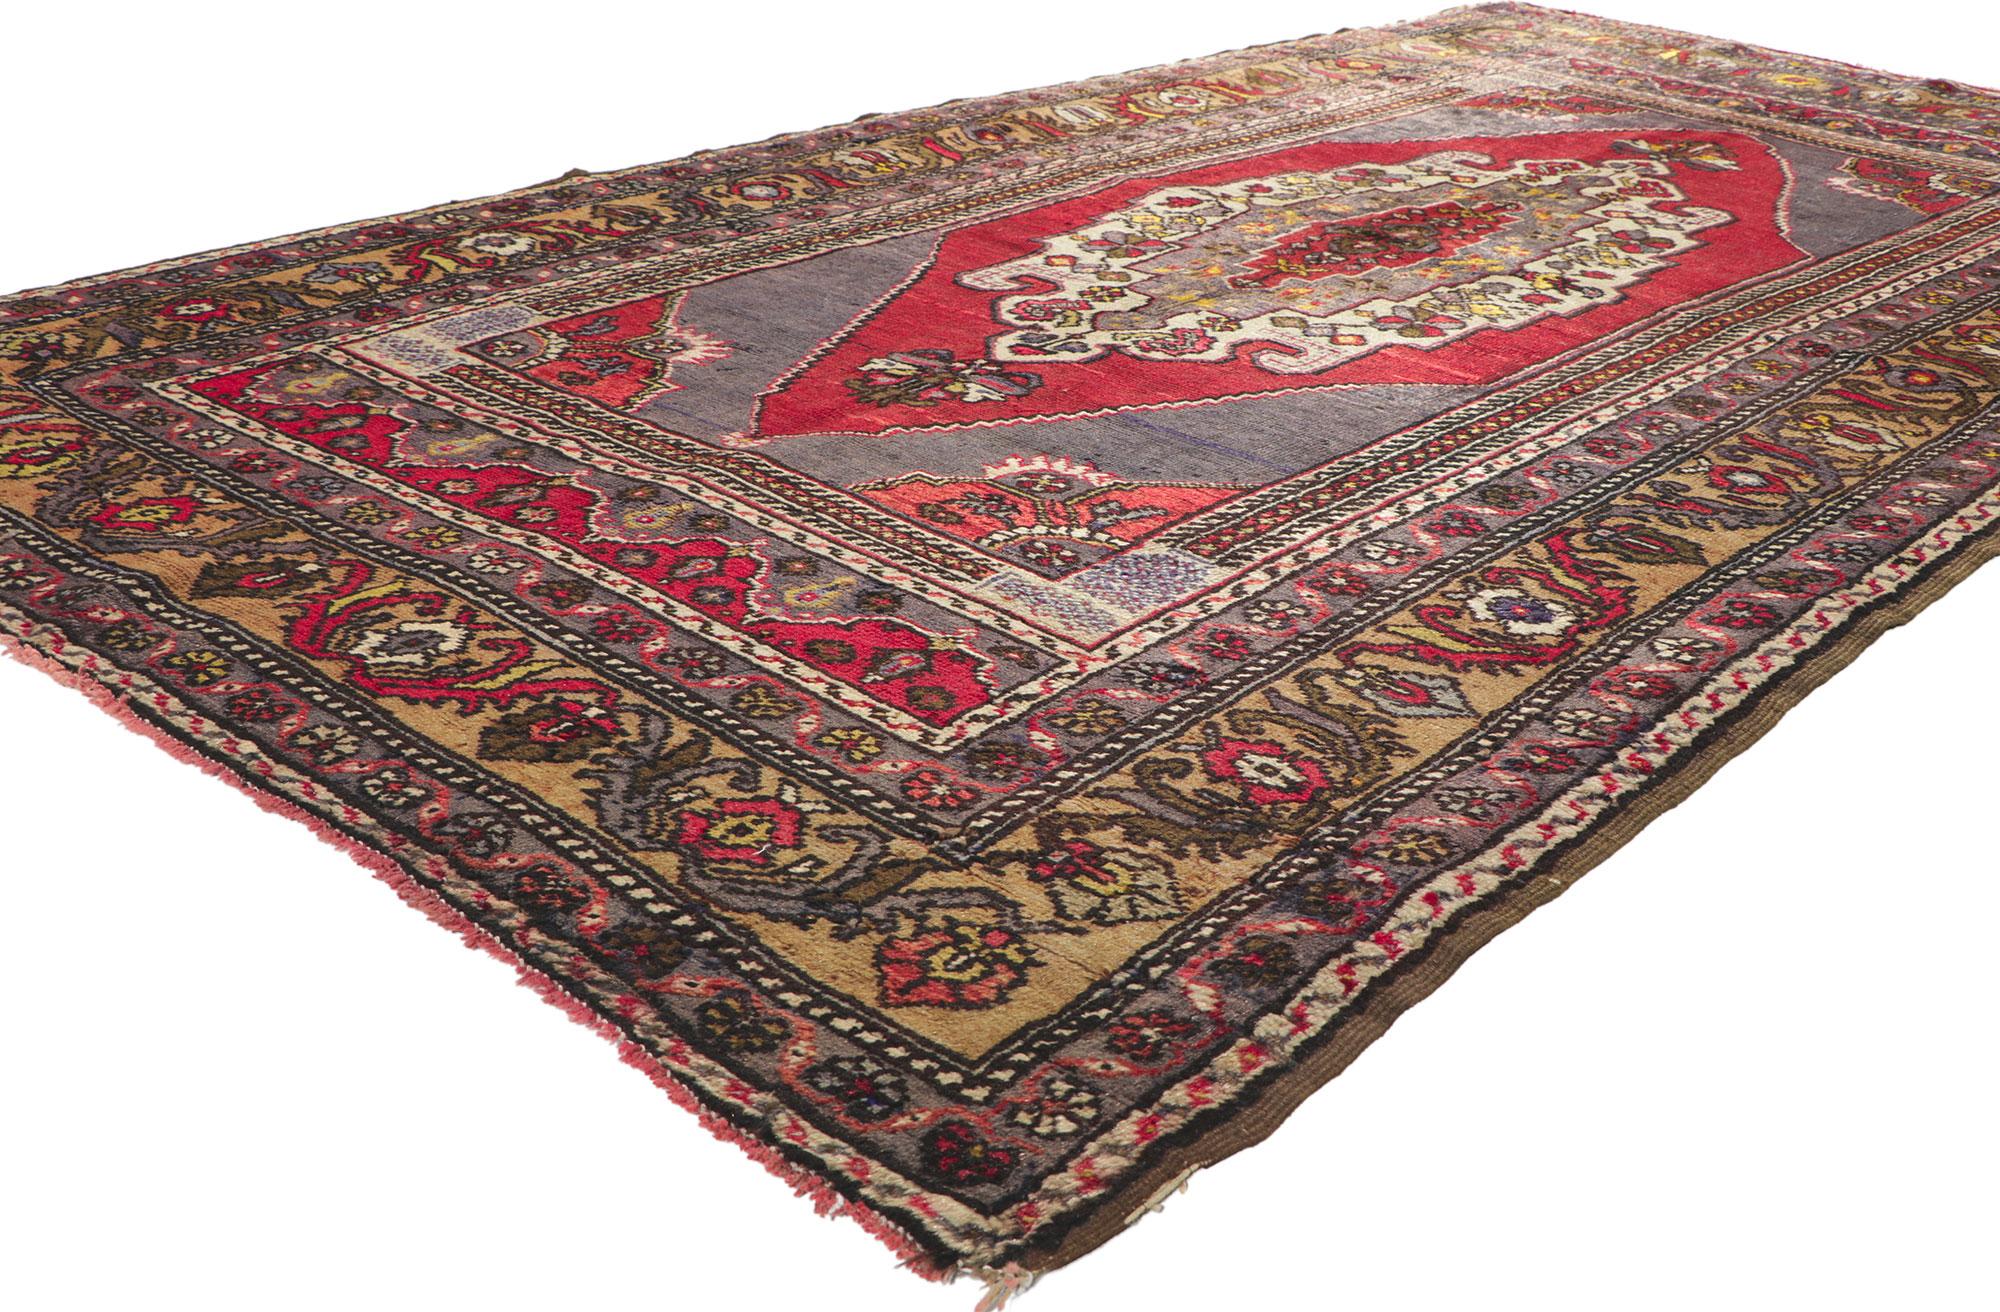 72690 Vintage Turkish Oushak Rug, 04'07 X 08'07.
Emanating timeless style with incredible detail and texture, this hand-knotted wool vintage Oushak rug is a captivating vision of woven beauty. The botanical design and rich color palette woven into